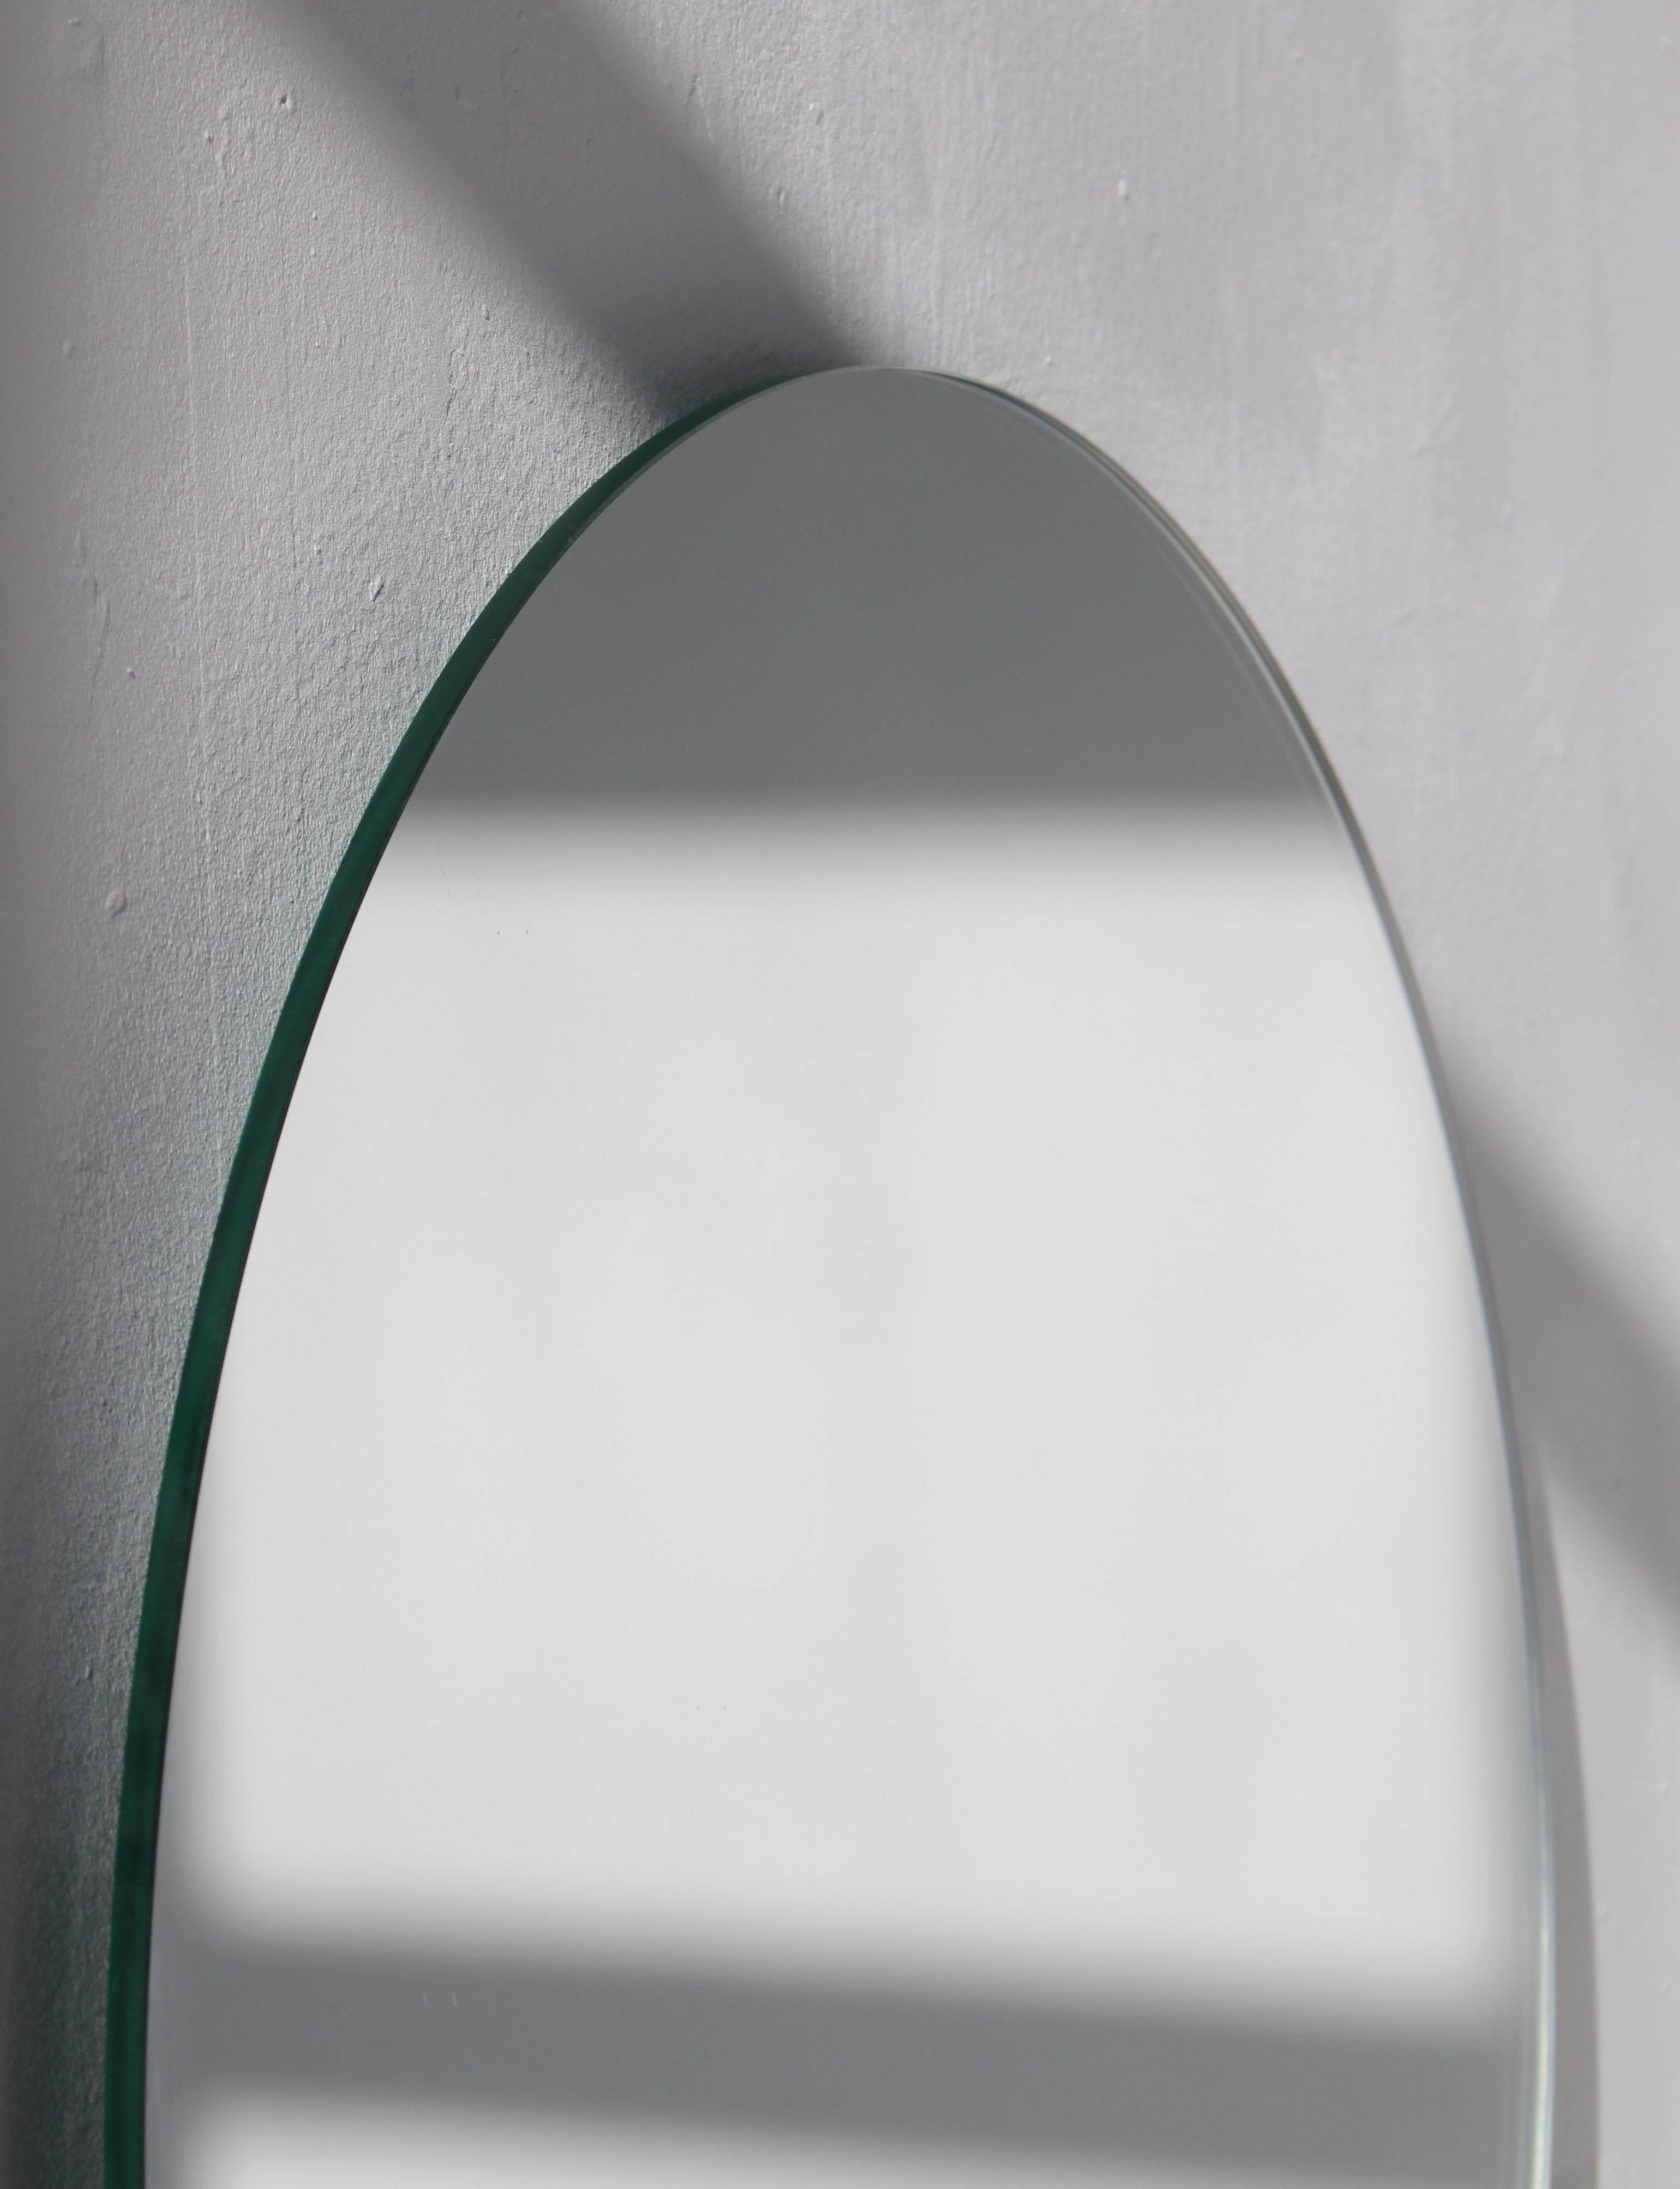 Silvered In Stock Orbis Round Minimalist Contemporary Frameless Mirror, Large For Sale